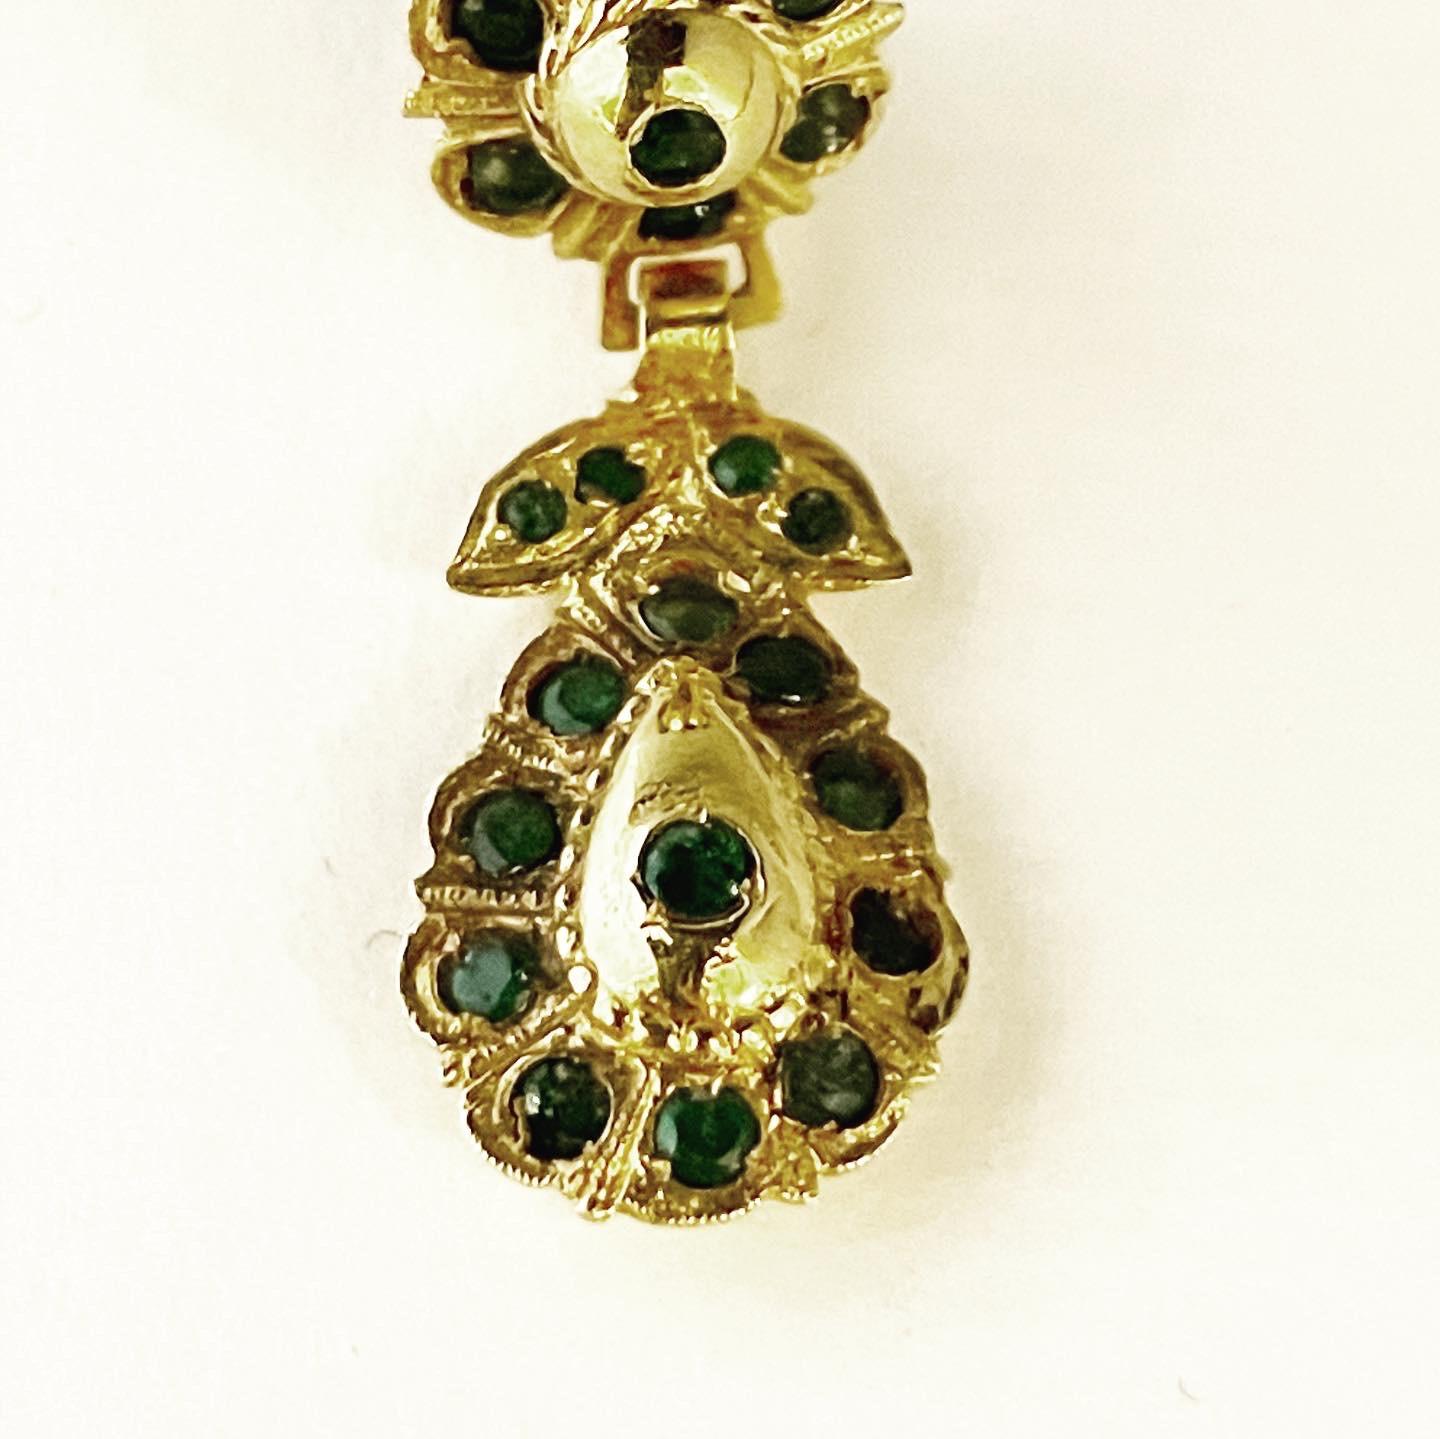 Exquisite emerald earrings crafted in 18k yellow gold.
Round cut emeralds set high in the gold mounts in the traditional forms of this Spanish region.
Clip-on.
Attractive and not heavy in weight due to their construction.

FREE SHIPPING.
RETURNS